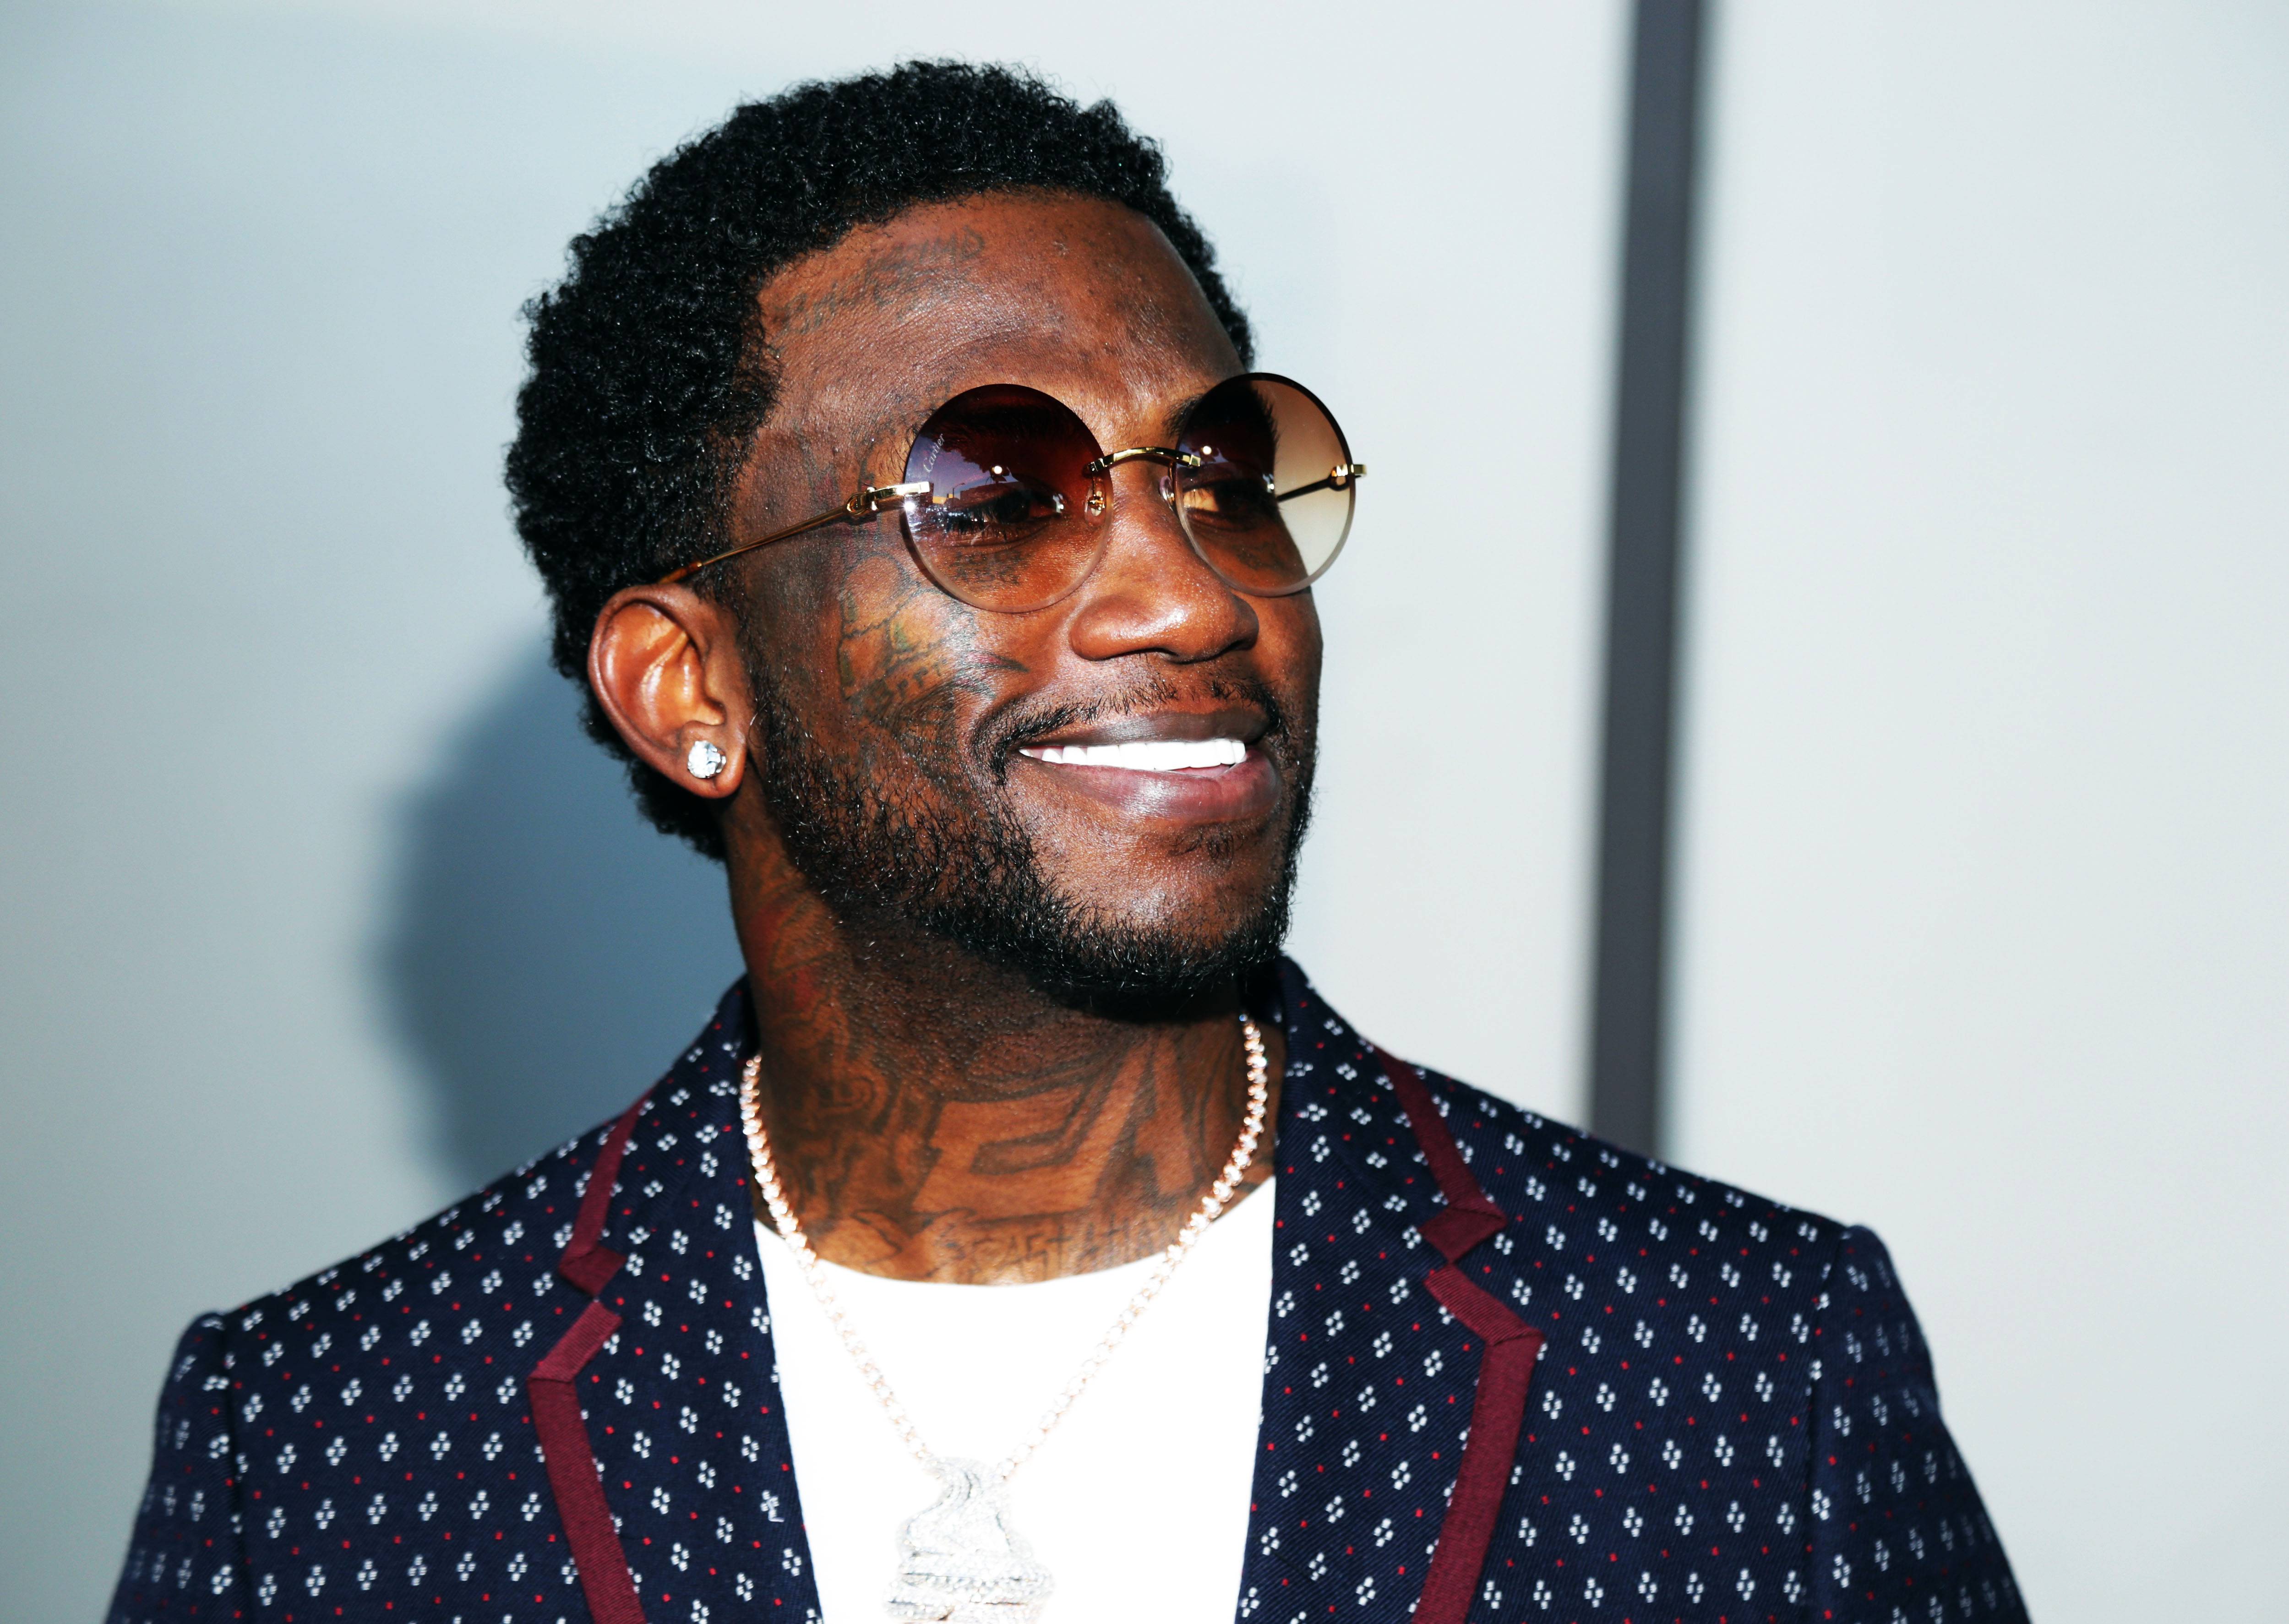 See The $30K Balmain Jacket Gucci Mane Is Rocking In His New Video